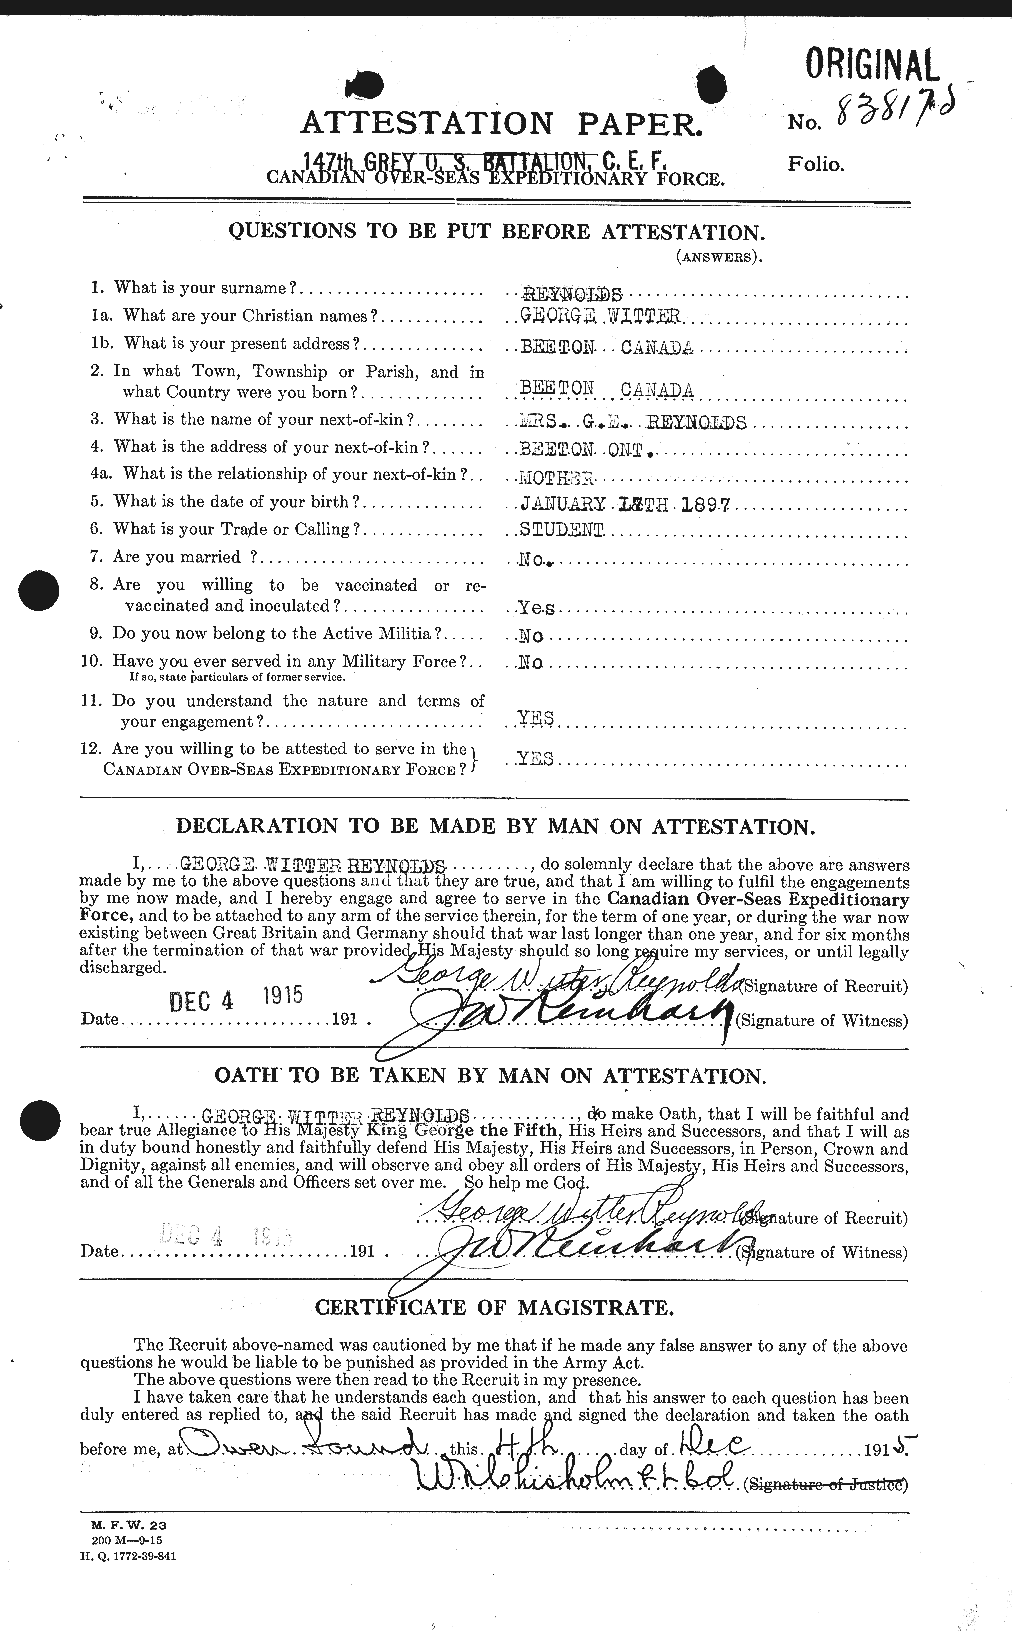 Personnel Records of the First World War - CEF 599227a